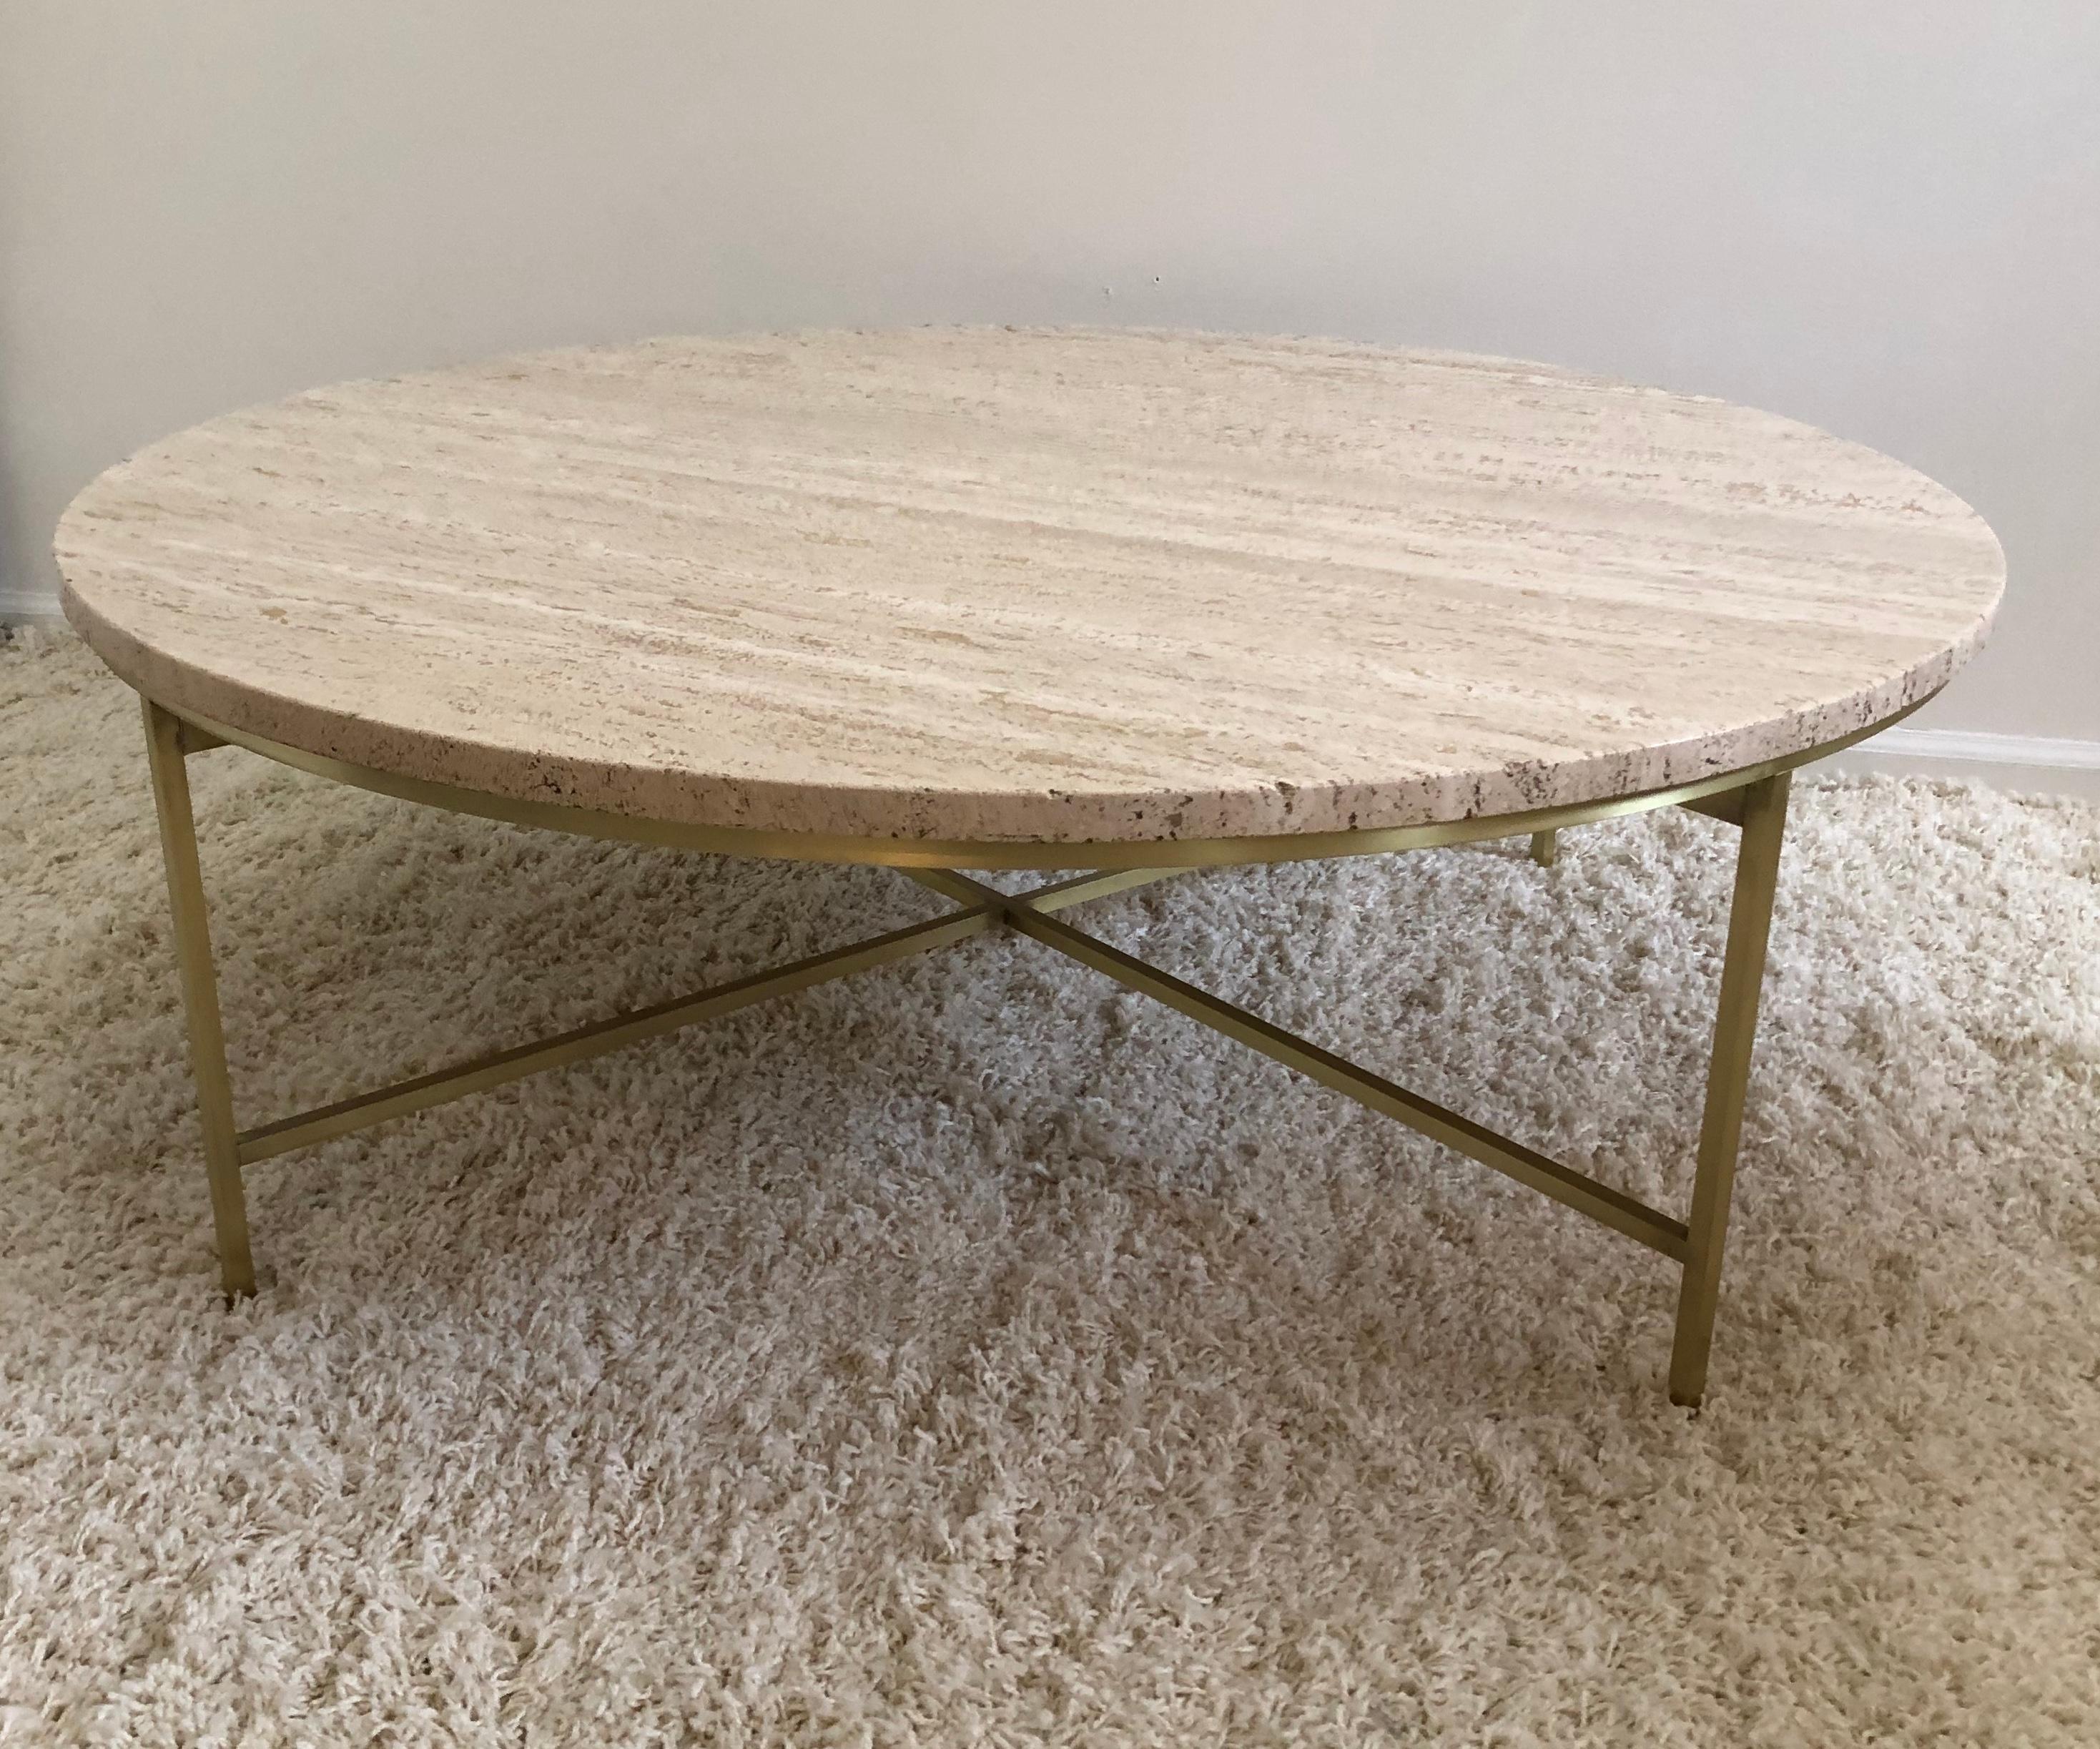 Paul McCobb planner group Terrazzo top brass cross band base circular cocktail / coffee table satin brushed finish lacquered base.